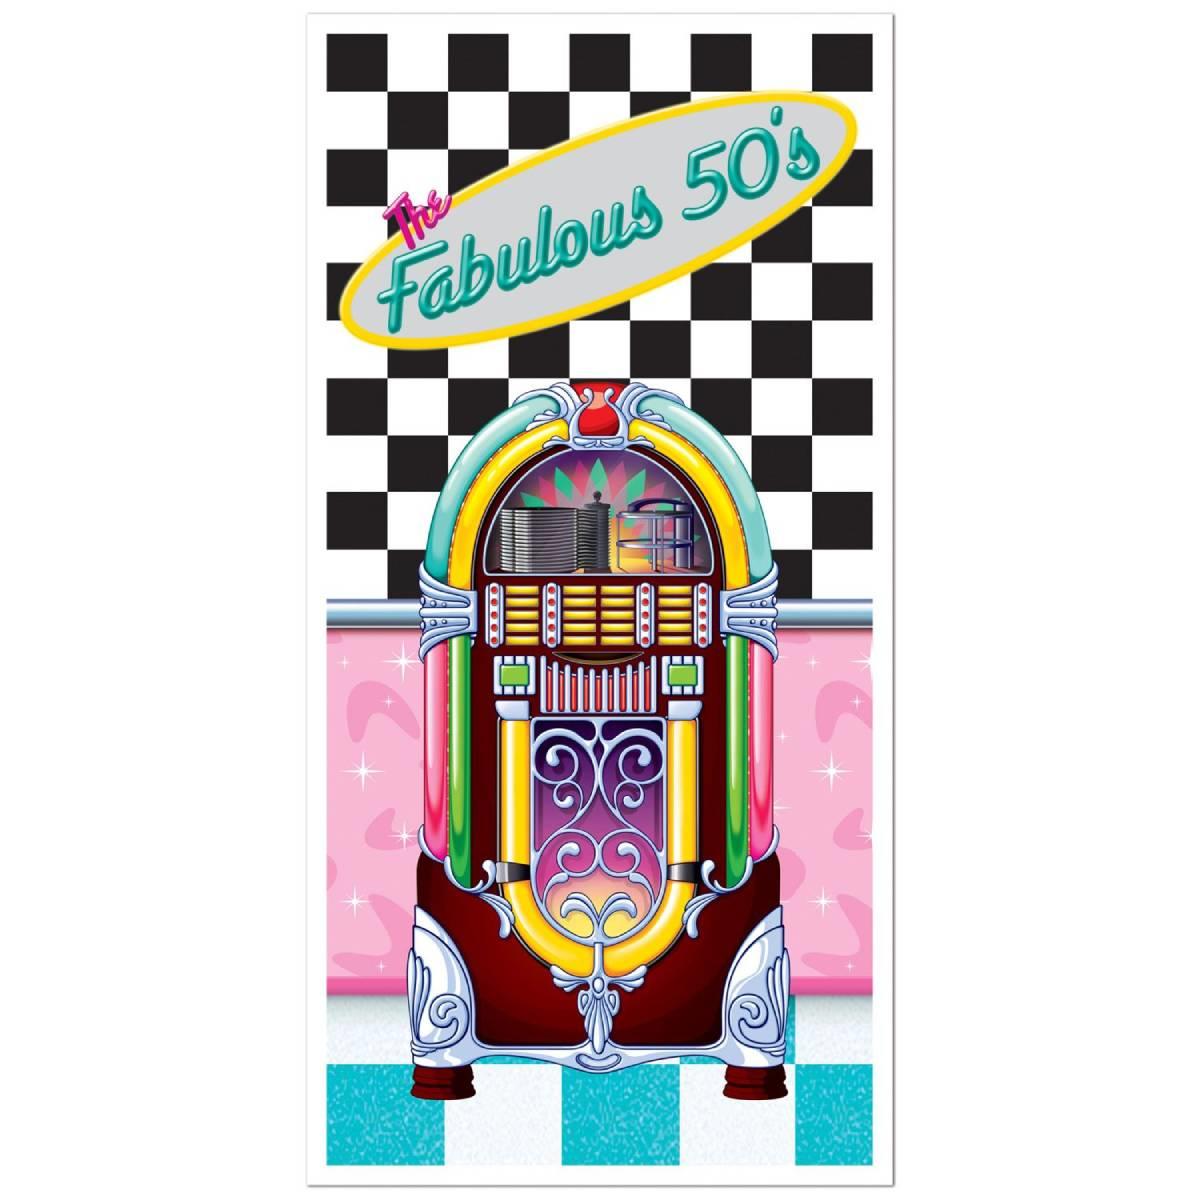 Fabulous 50s Party Decoration Door Cover by Beistle 57088 available here at Karnival Costumes online party shop